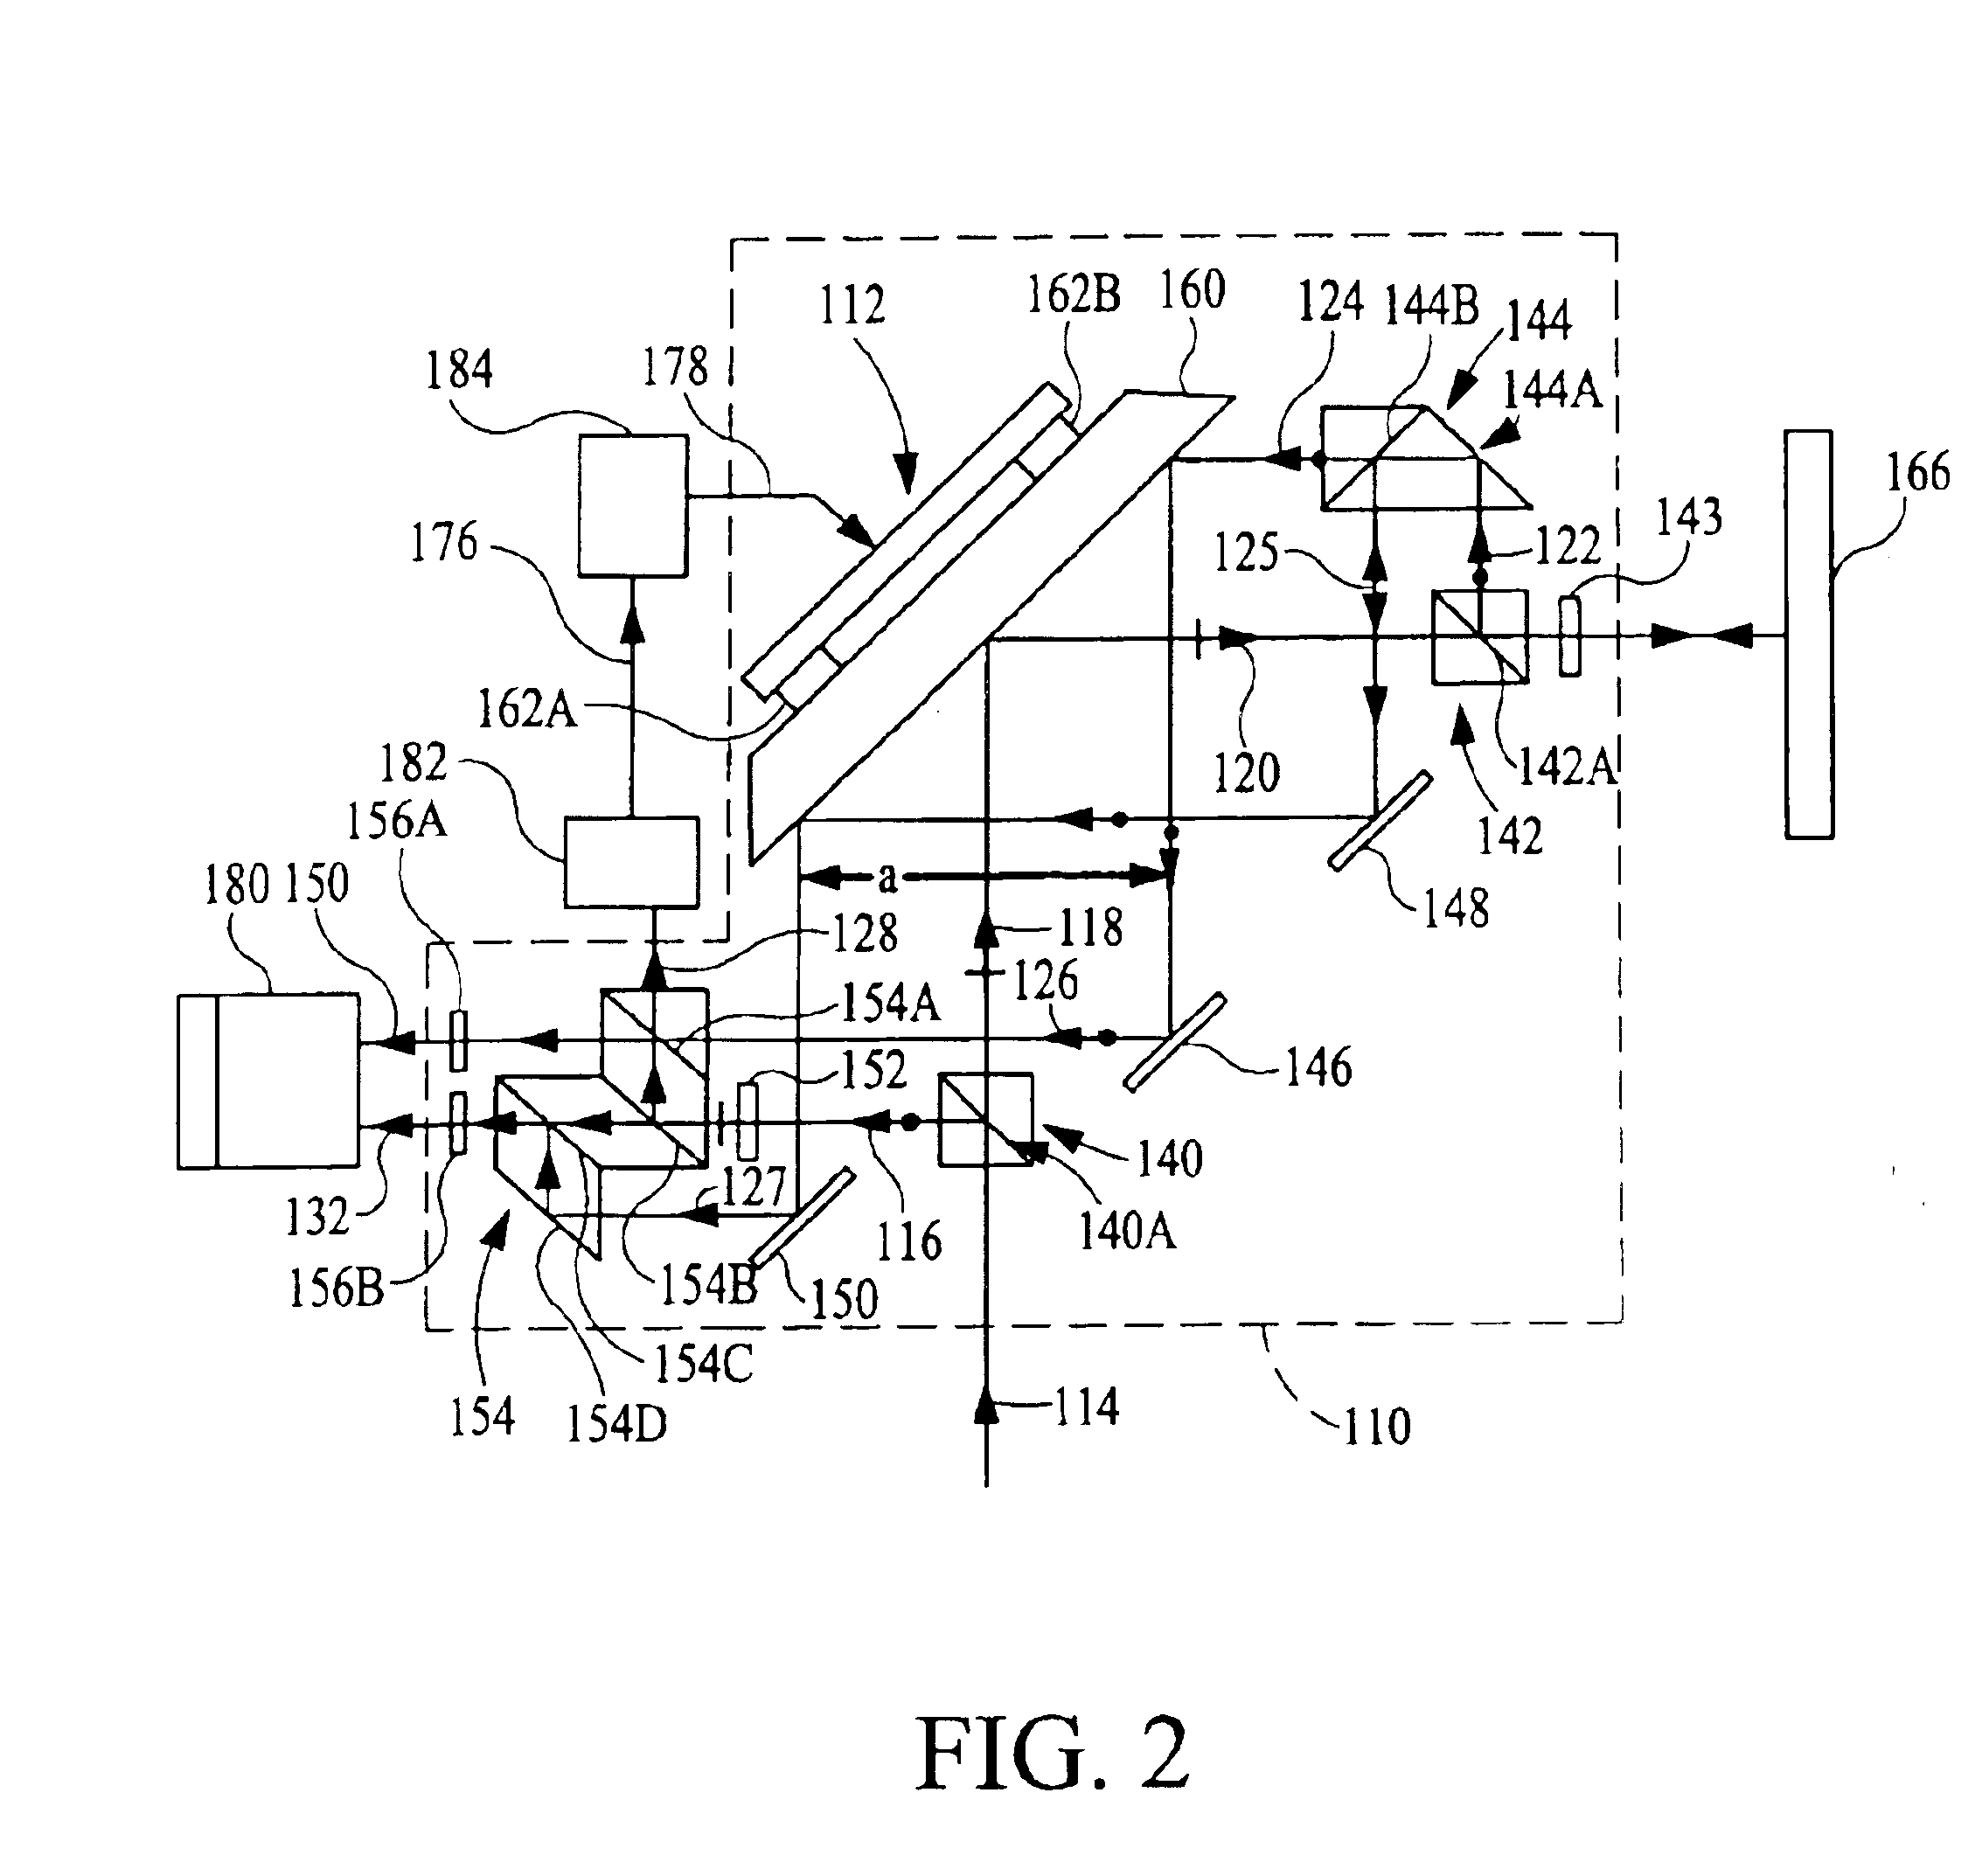 Interferometry system having a dynamic beam steering assembly for measuring angle and distance